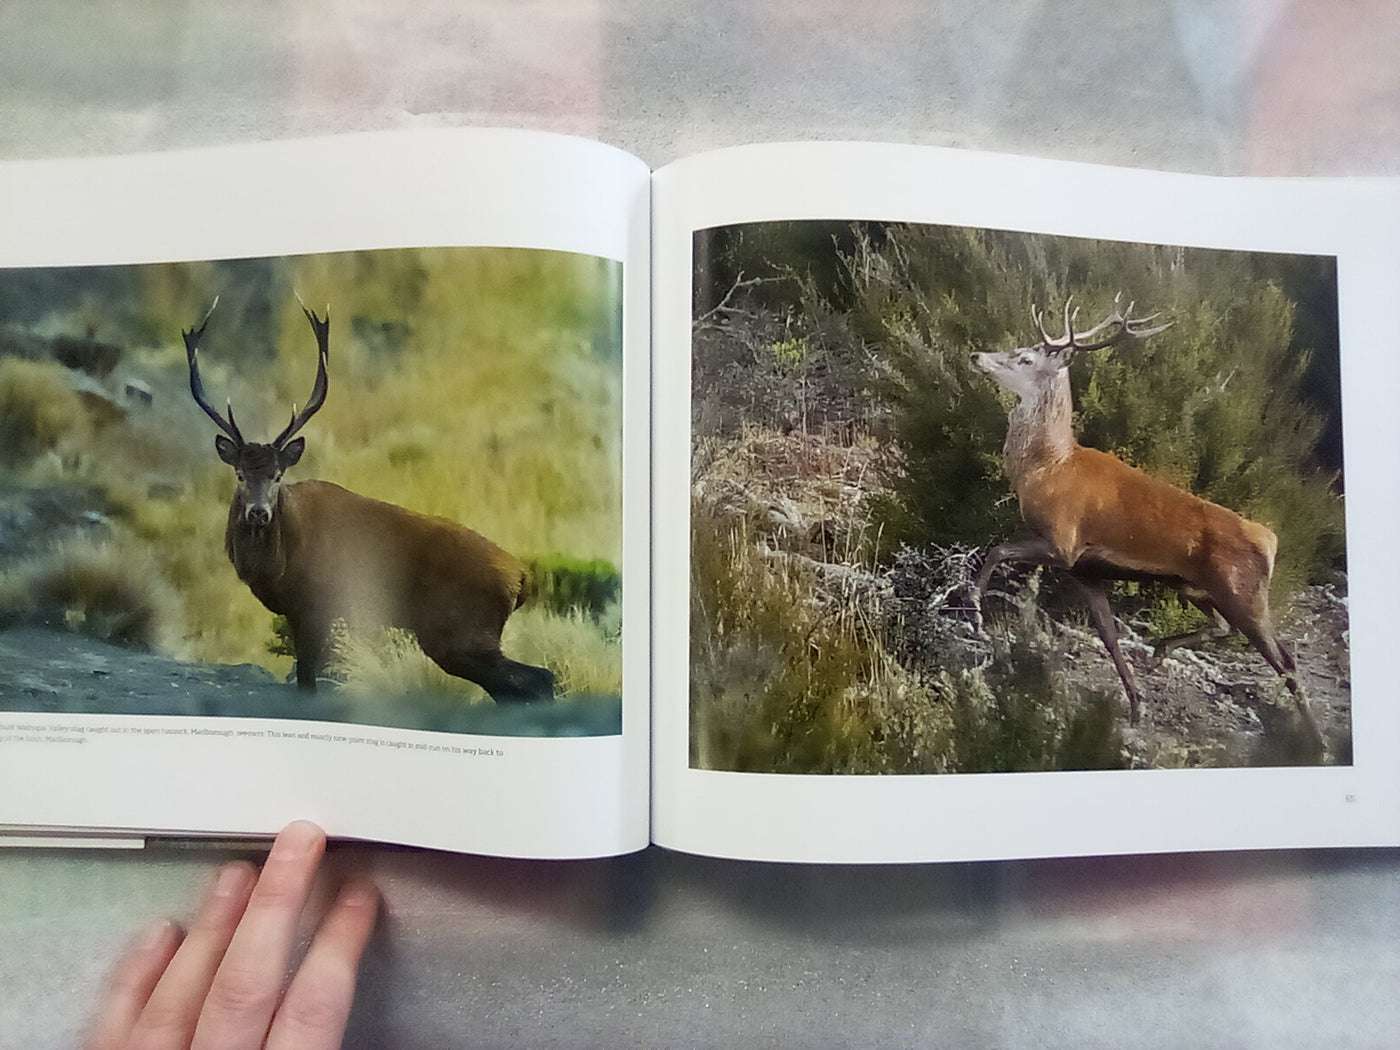 The Heart of Hunting - Wilderness & Hunting in New Zealand by Greig Caigou and Matt Winter